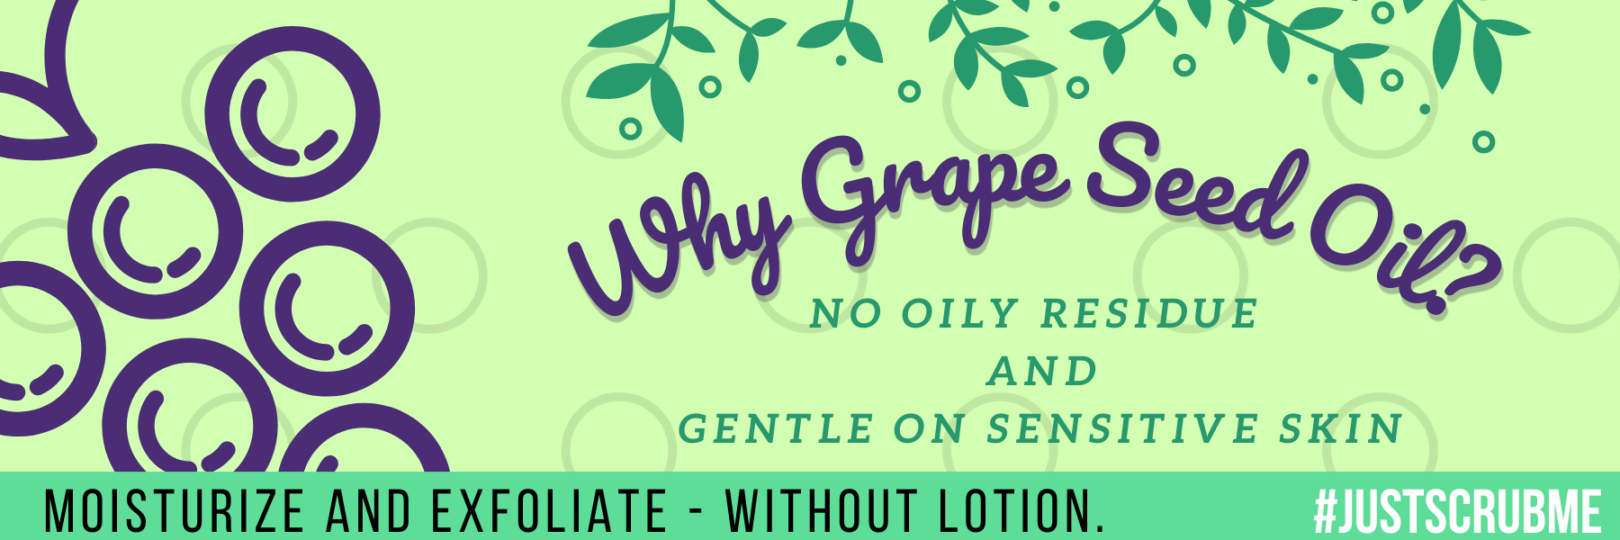 Grapeseed oil for the skin!